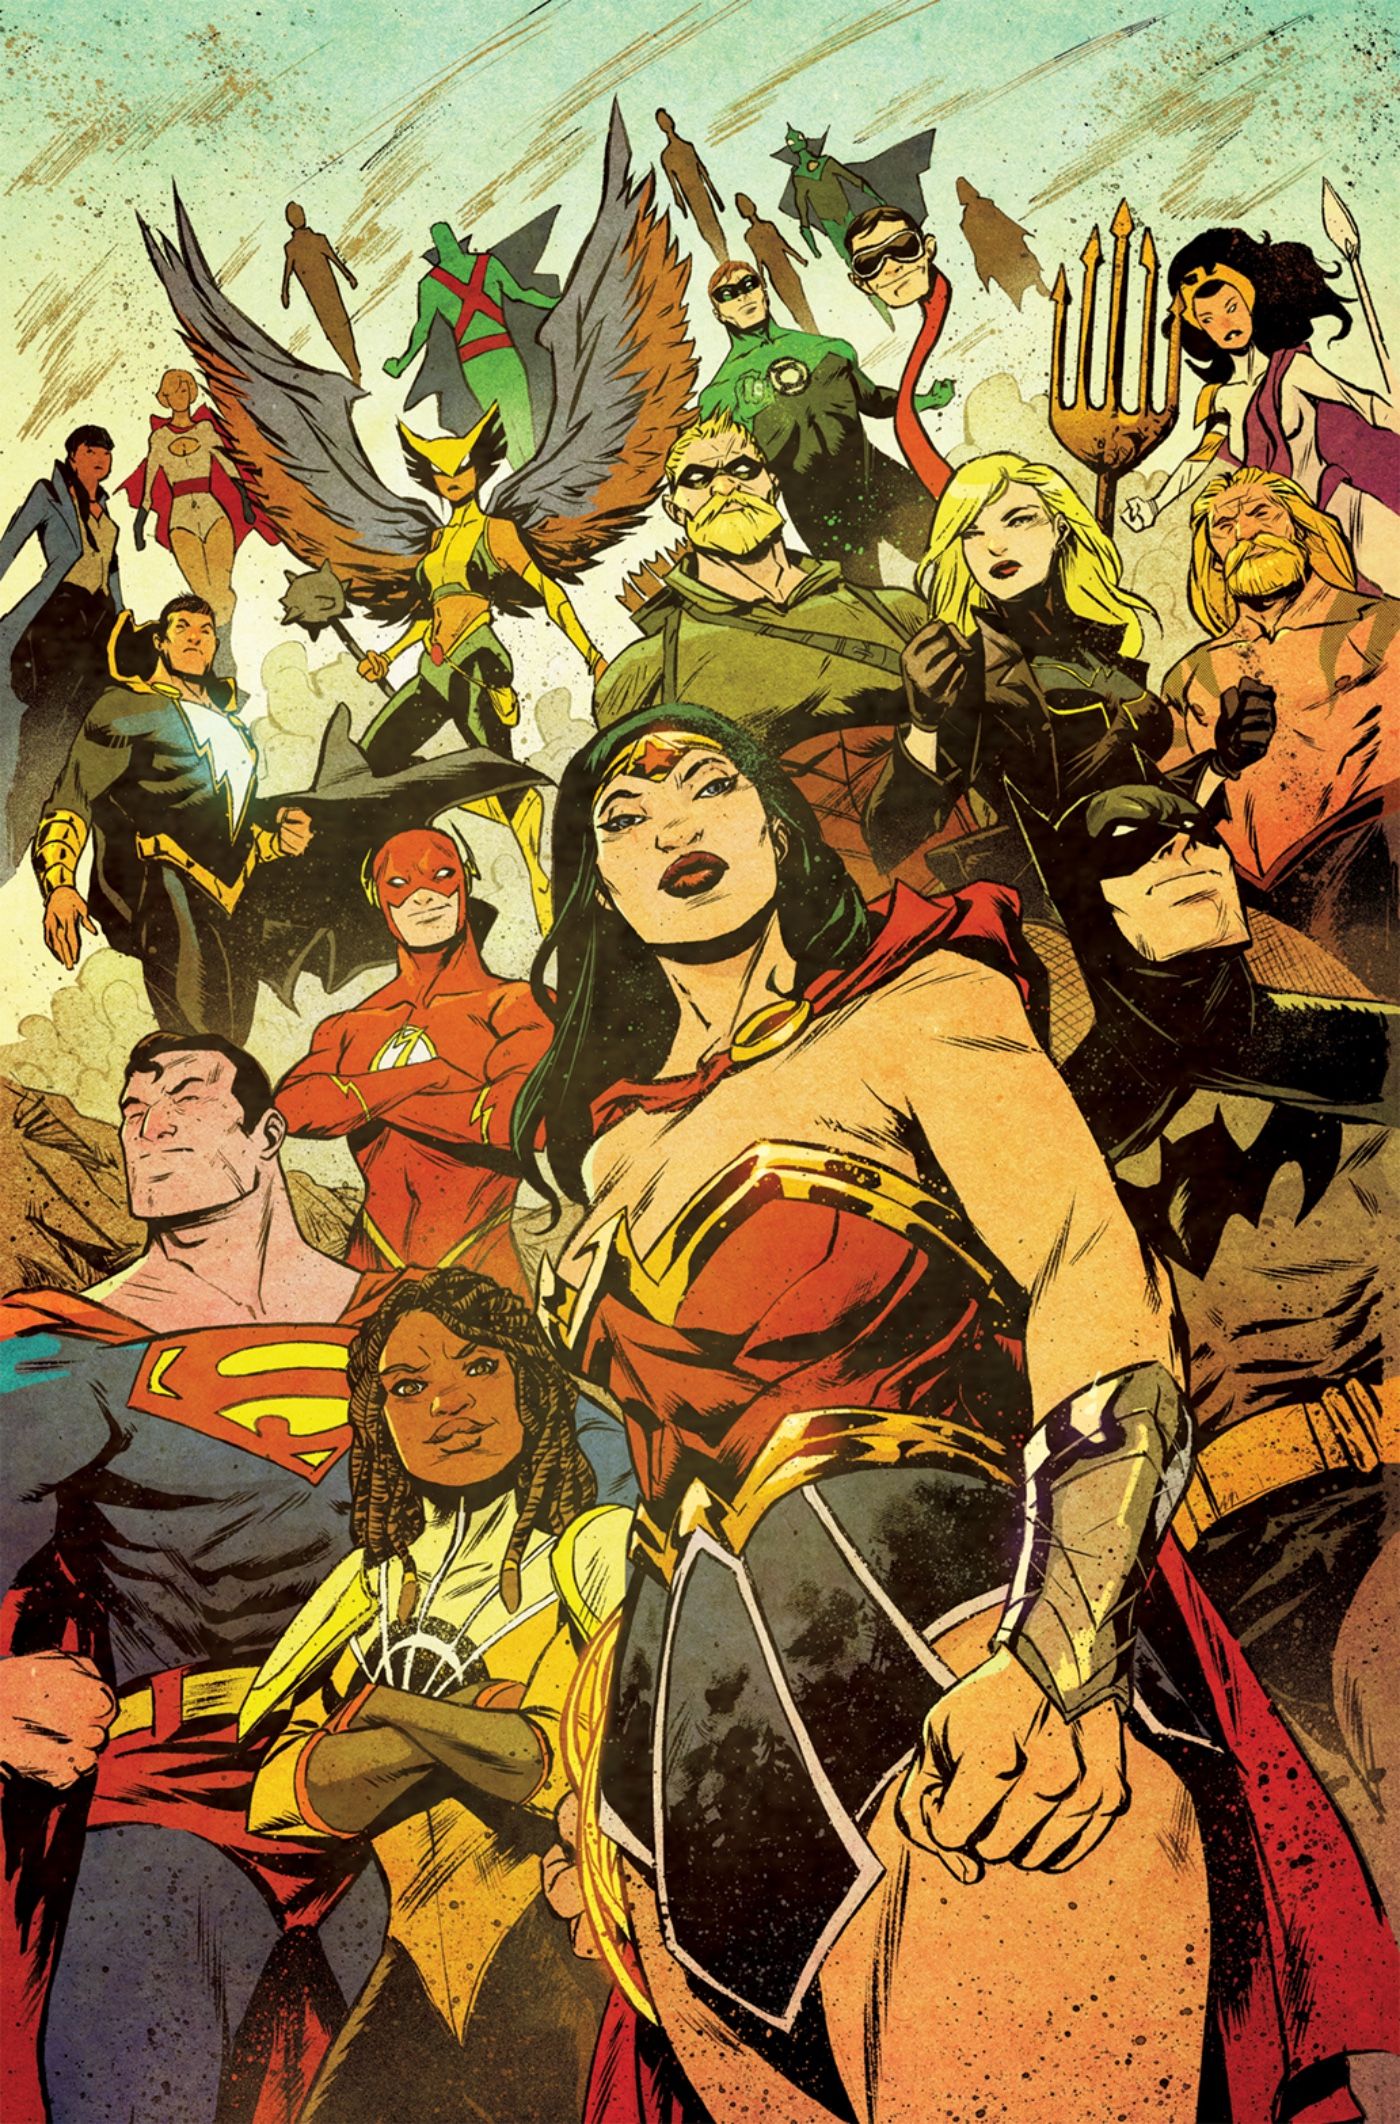 Justice League Annual 1 cover featuring Wonder Woman and the rest of the League